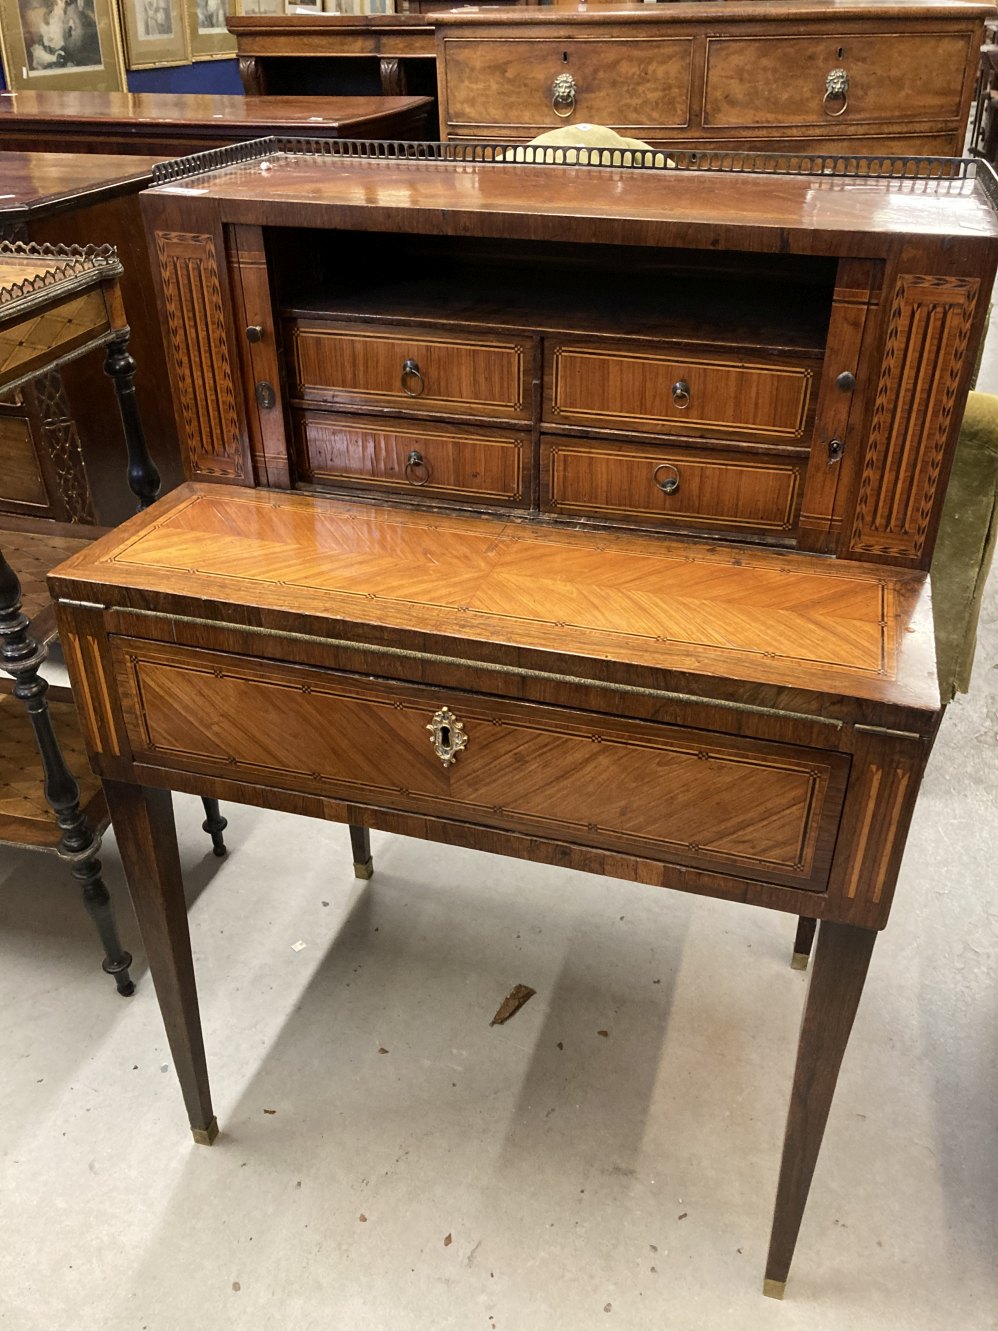 19th cent. Kingwood and rosewood inlaid bonheur du jour the top with brass gallery above two sliding